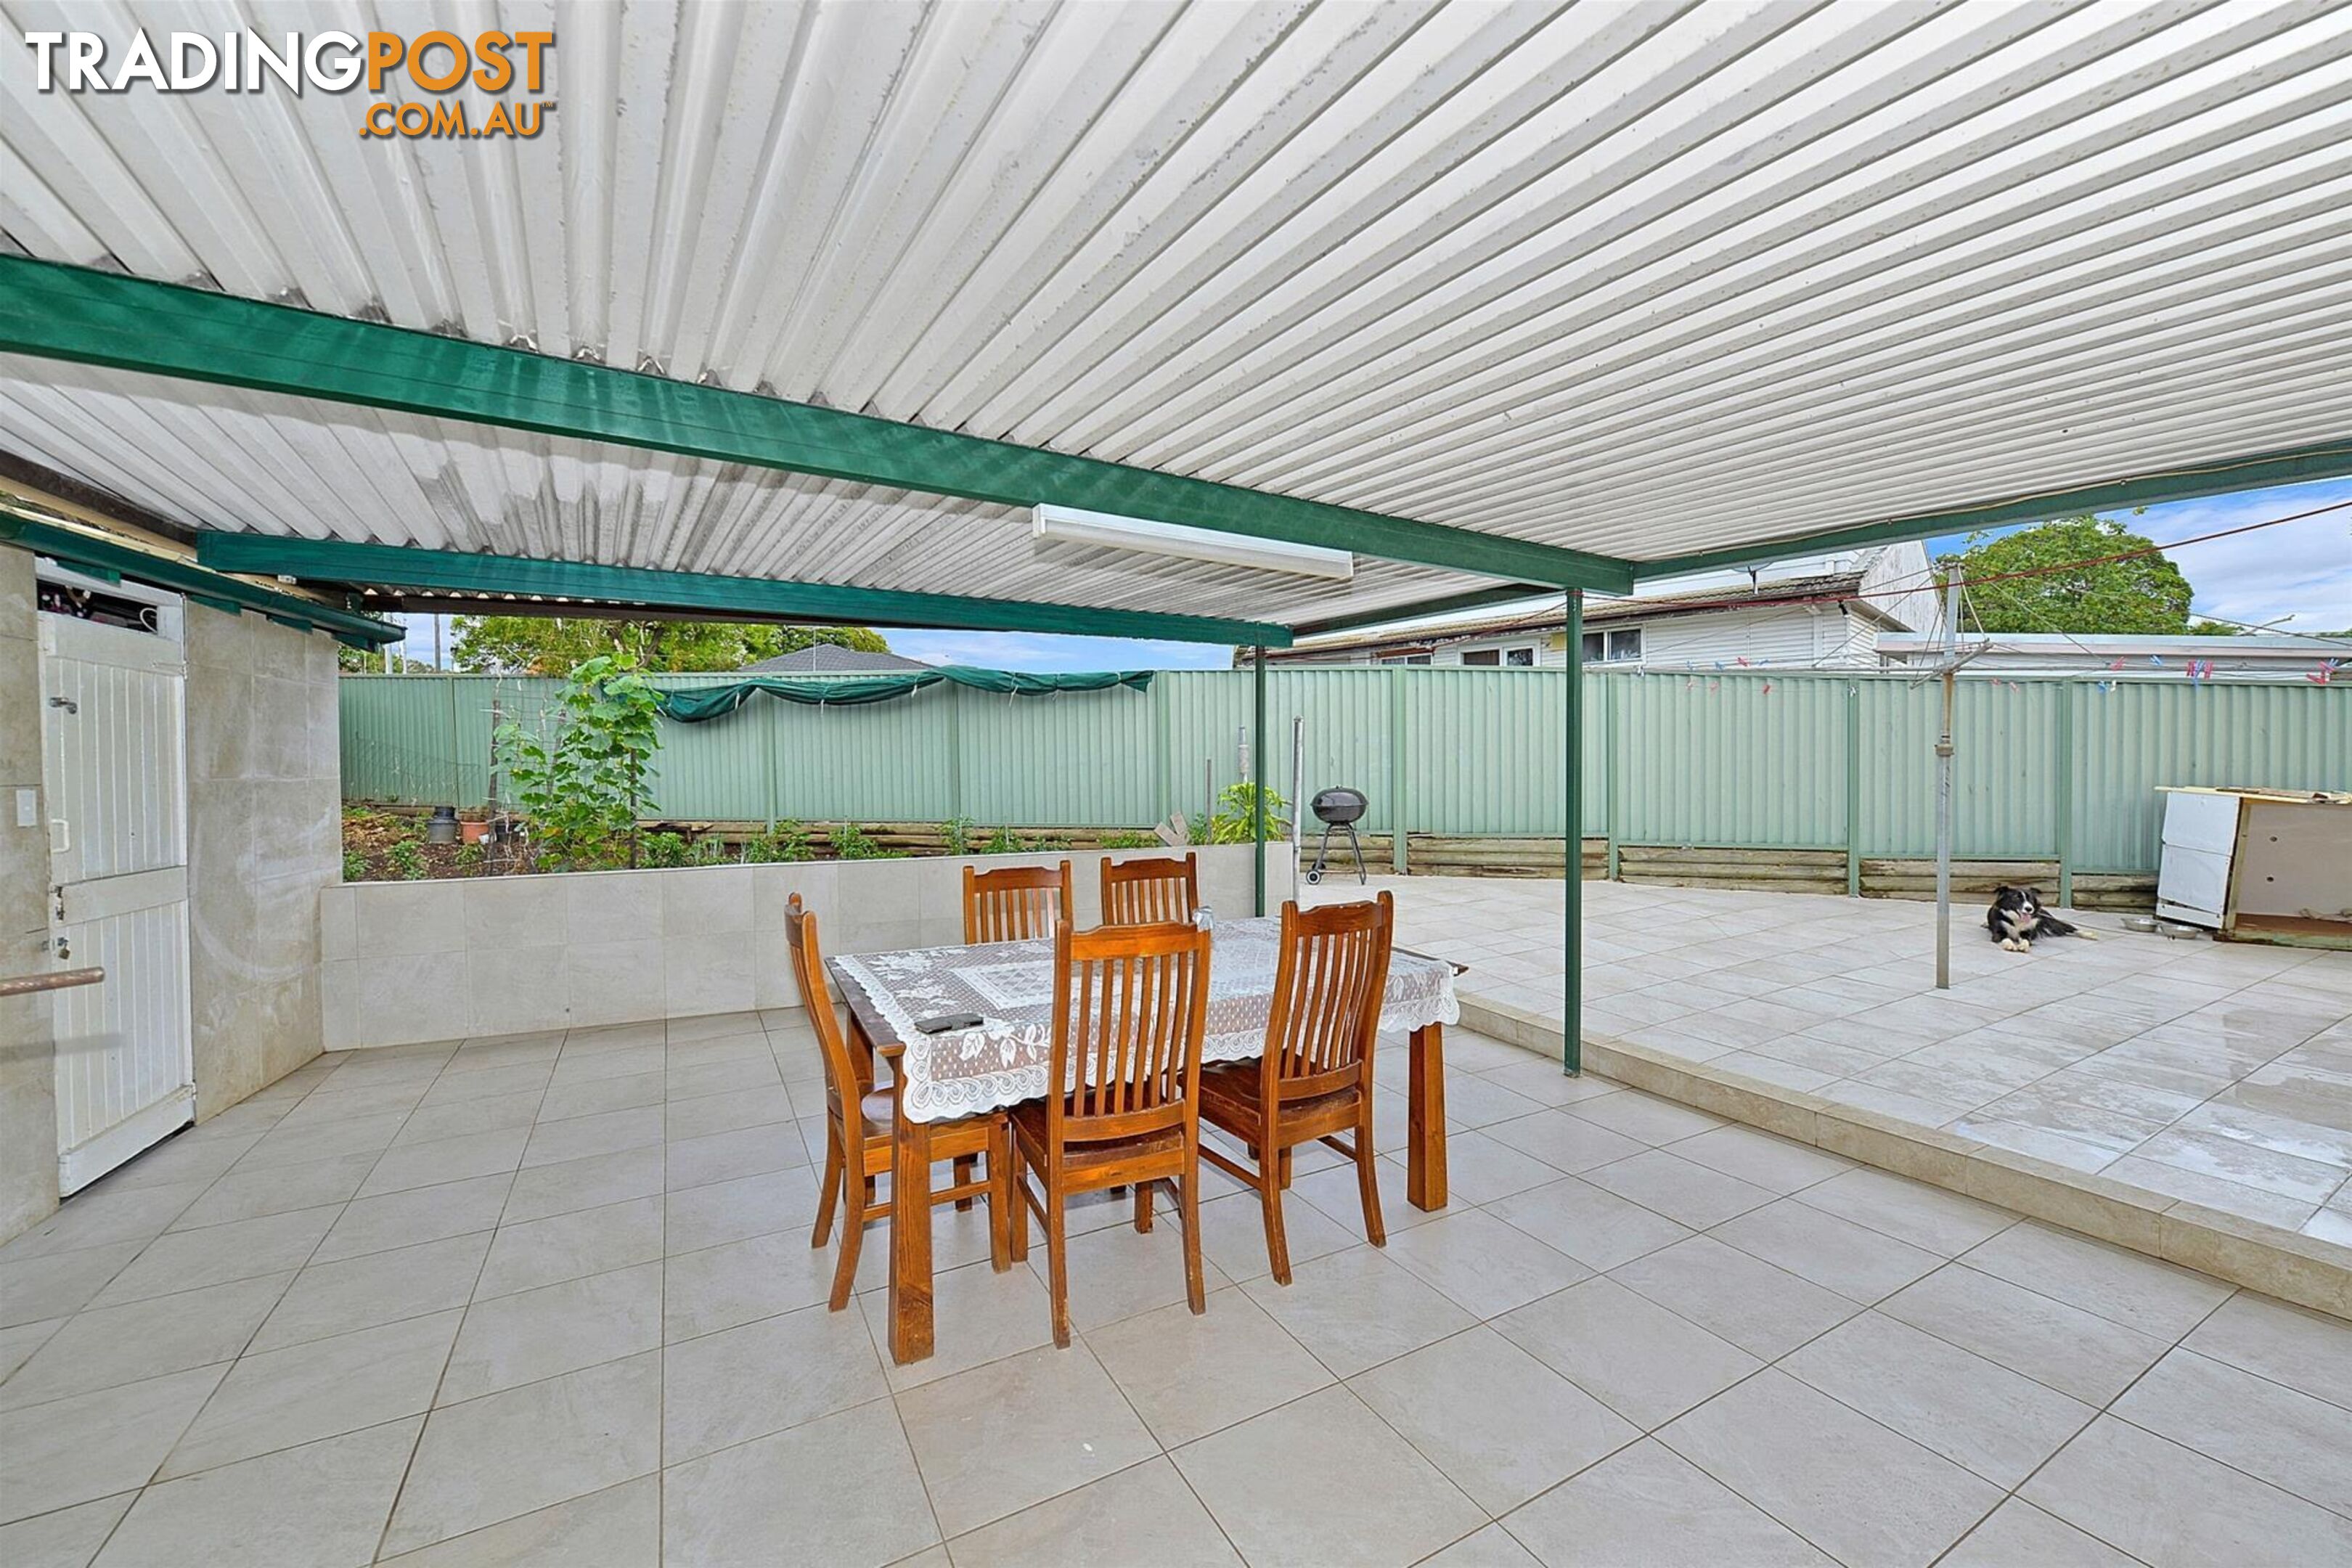 23 Woodville Road Chester Hill NSW 2162